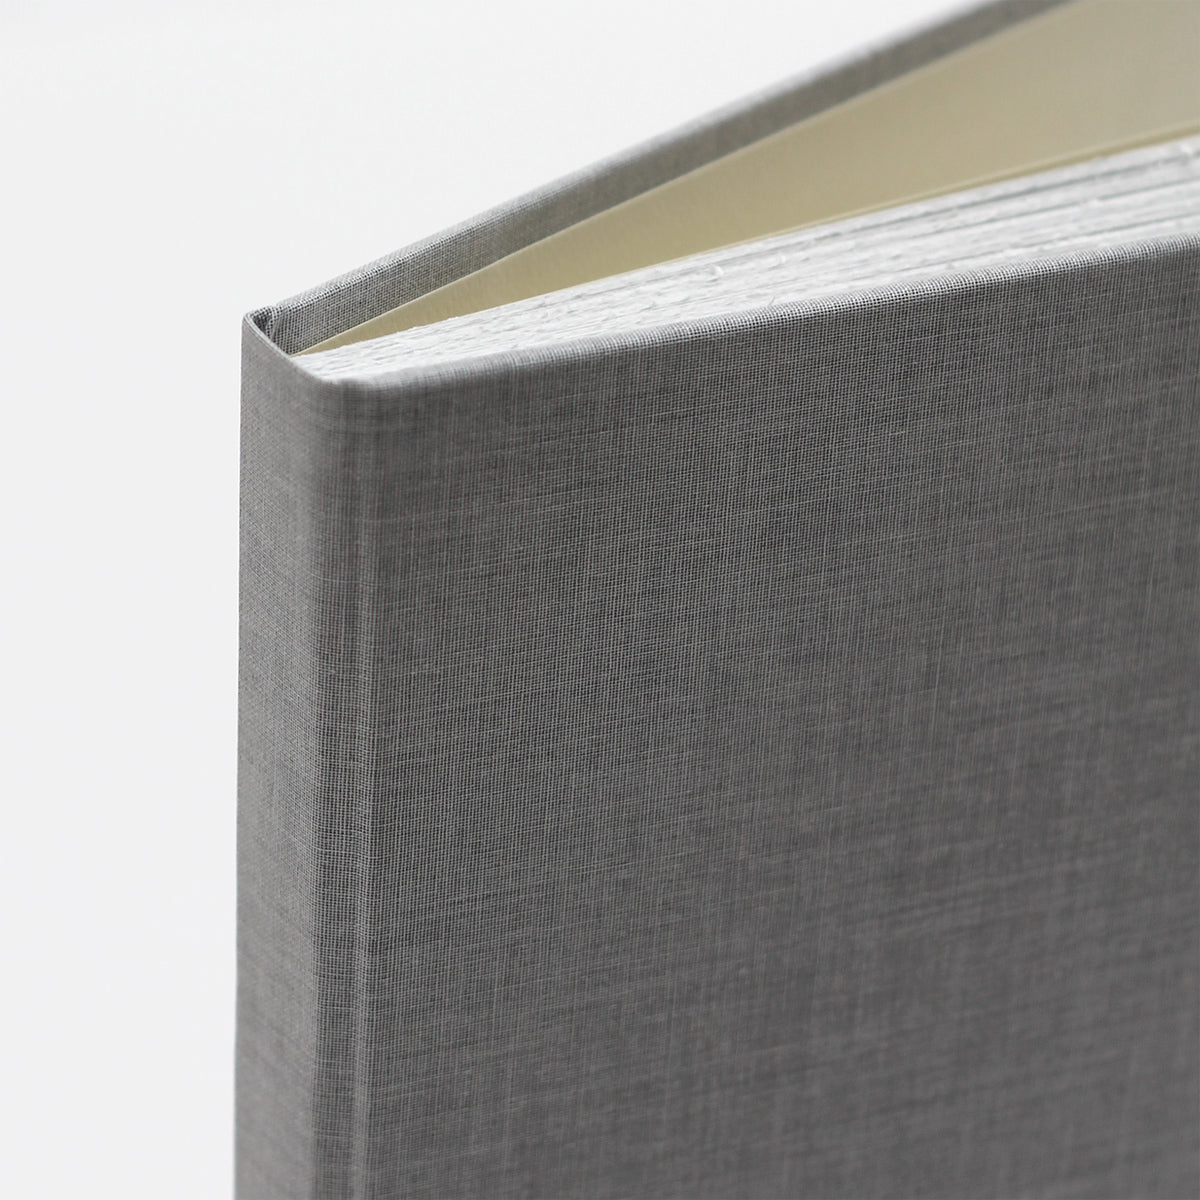 Large 8x10 Blank Page Journal | Cover: Dove Gray Cotton | Available Personalized